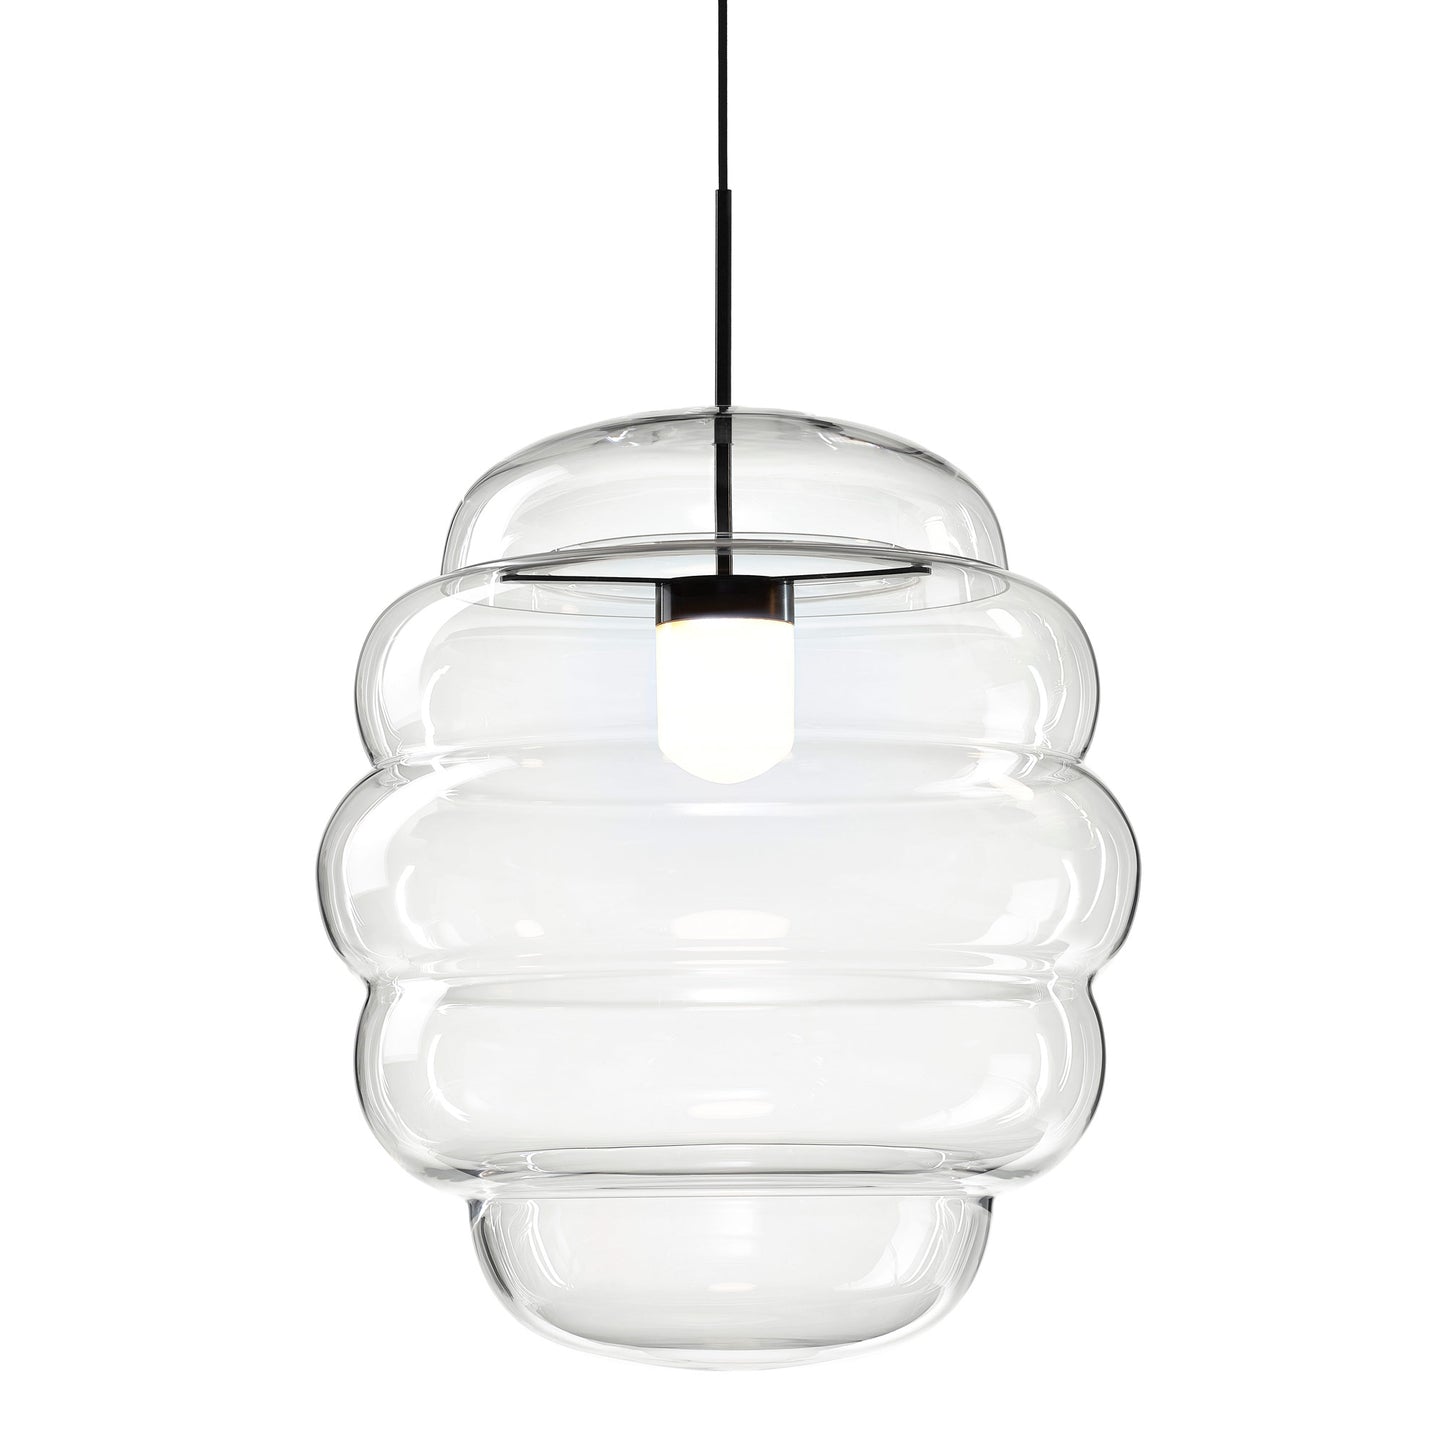 BOMMA - BLIMP PENDANT LARGE - from $4,218.50